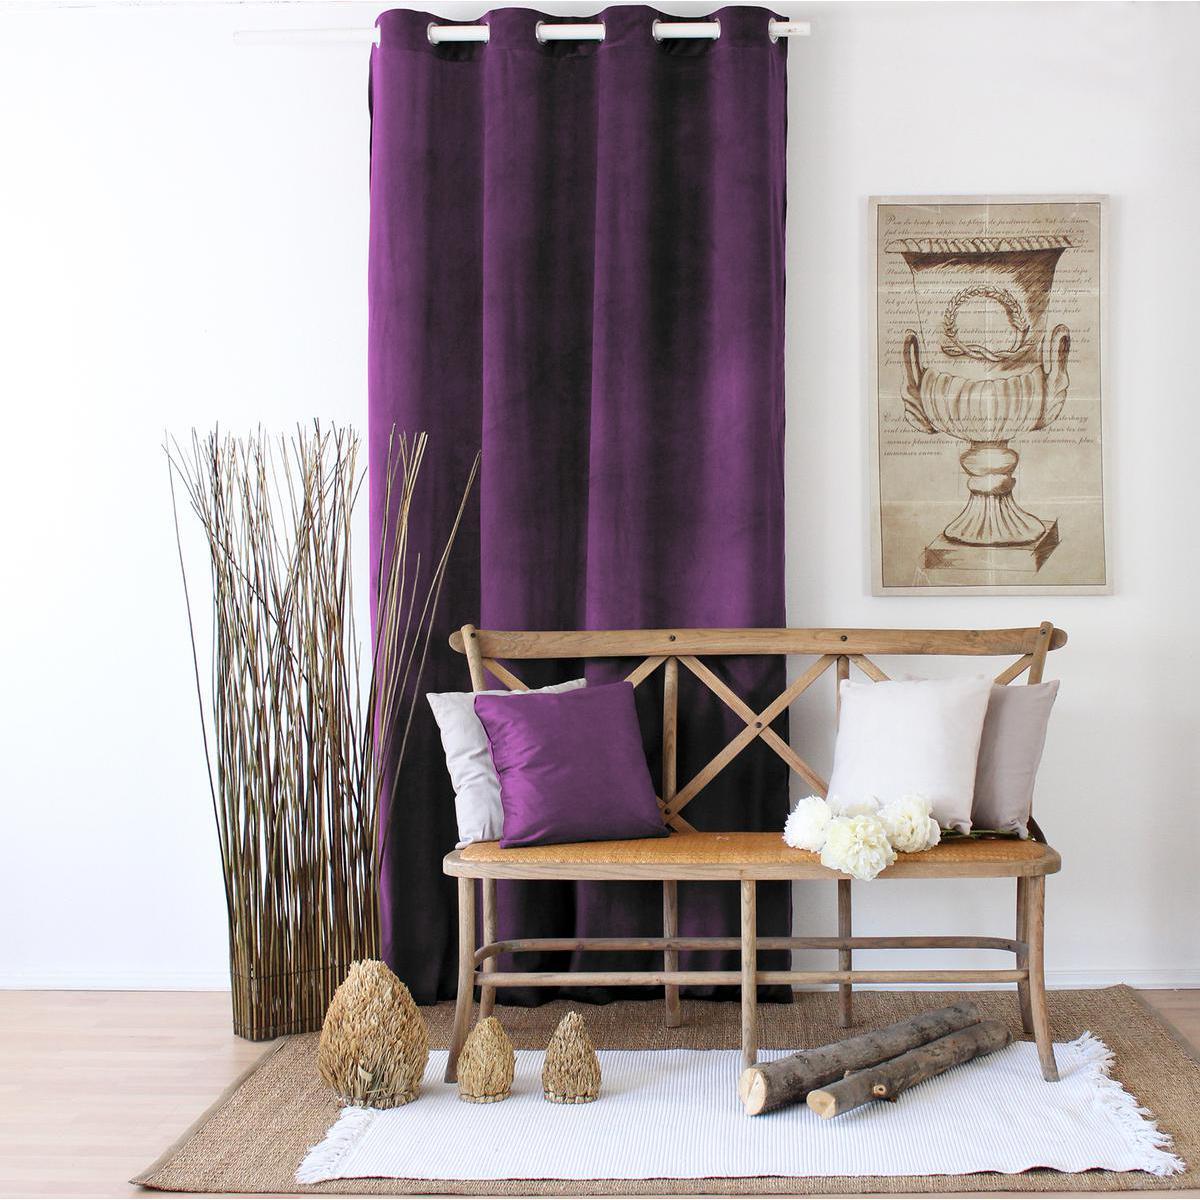 Coussin - 100% polyester - 40 x 40 cm - Violet